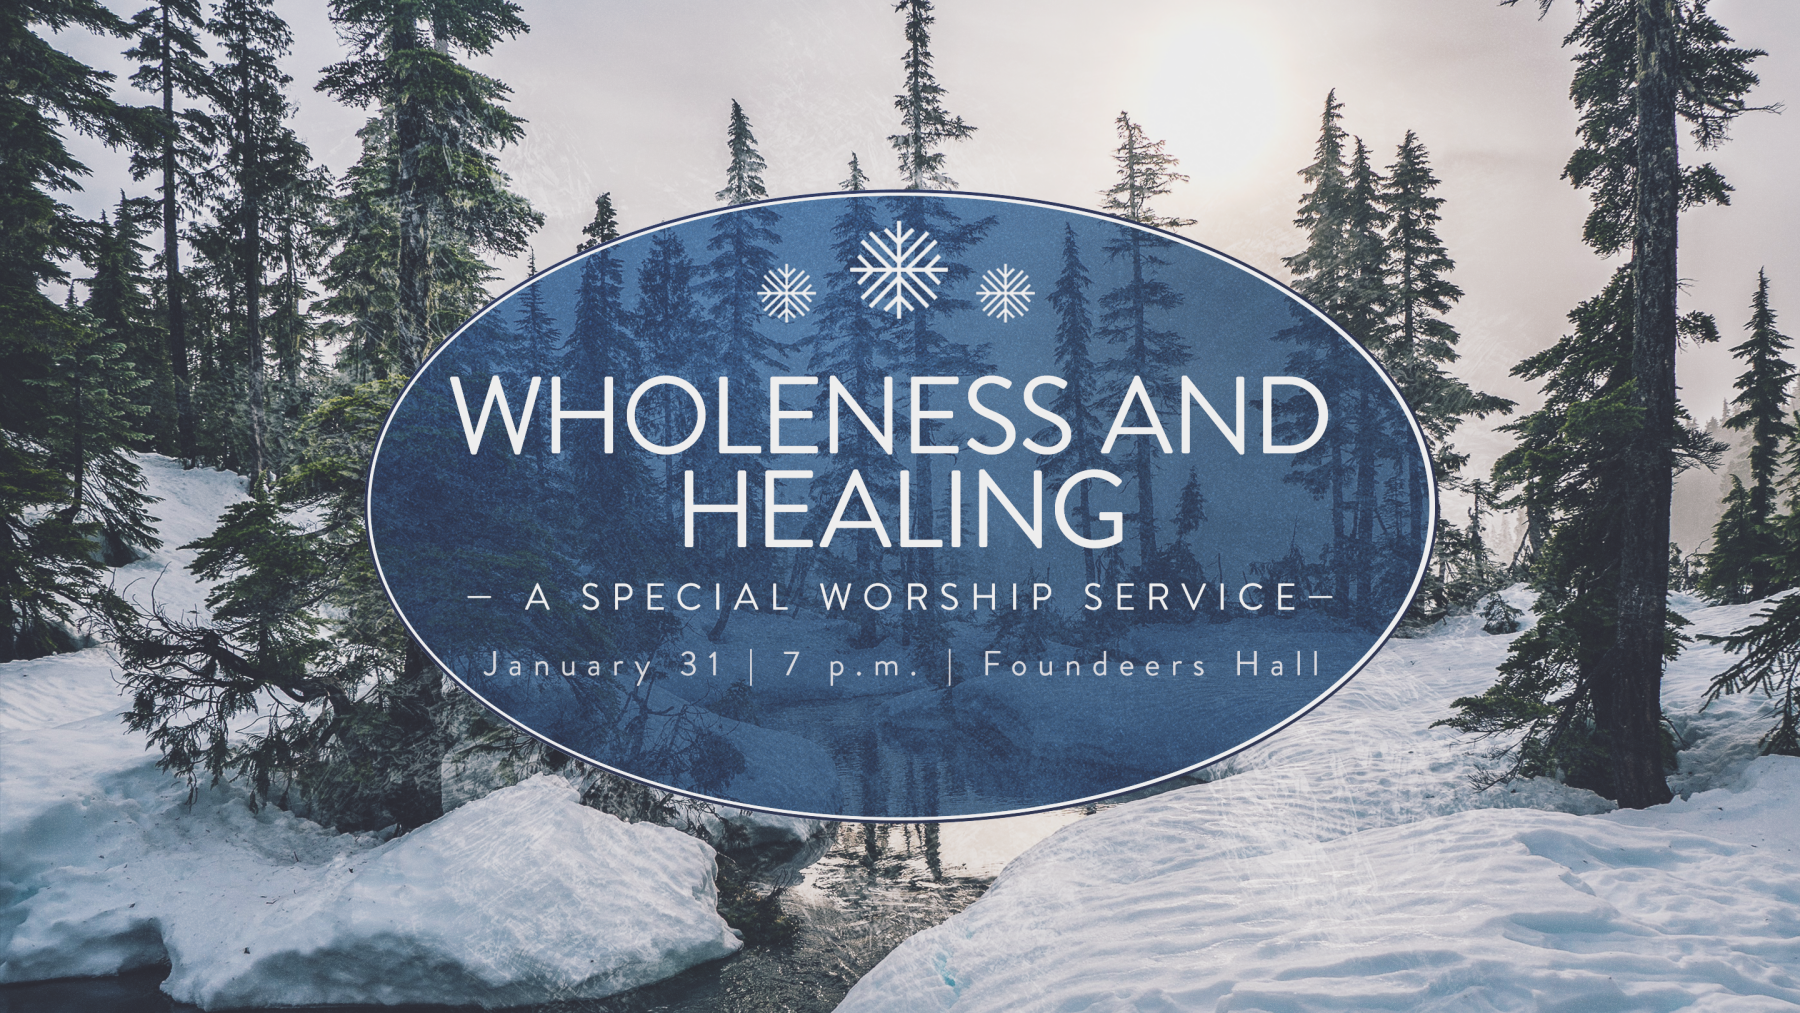 Wholeness and Healing Service